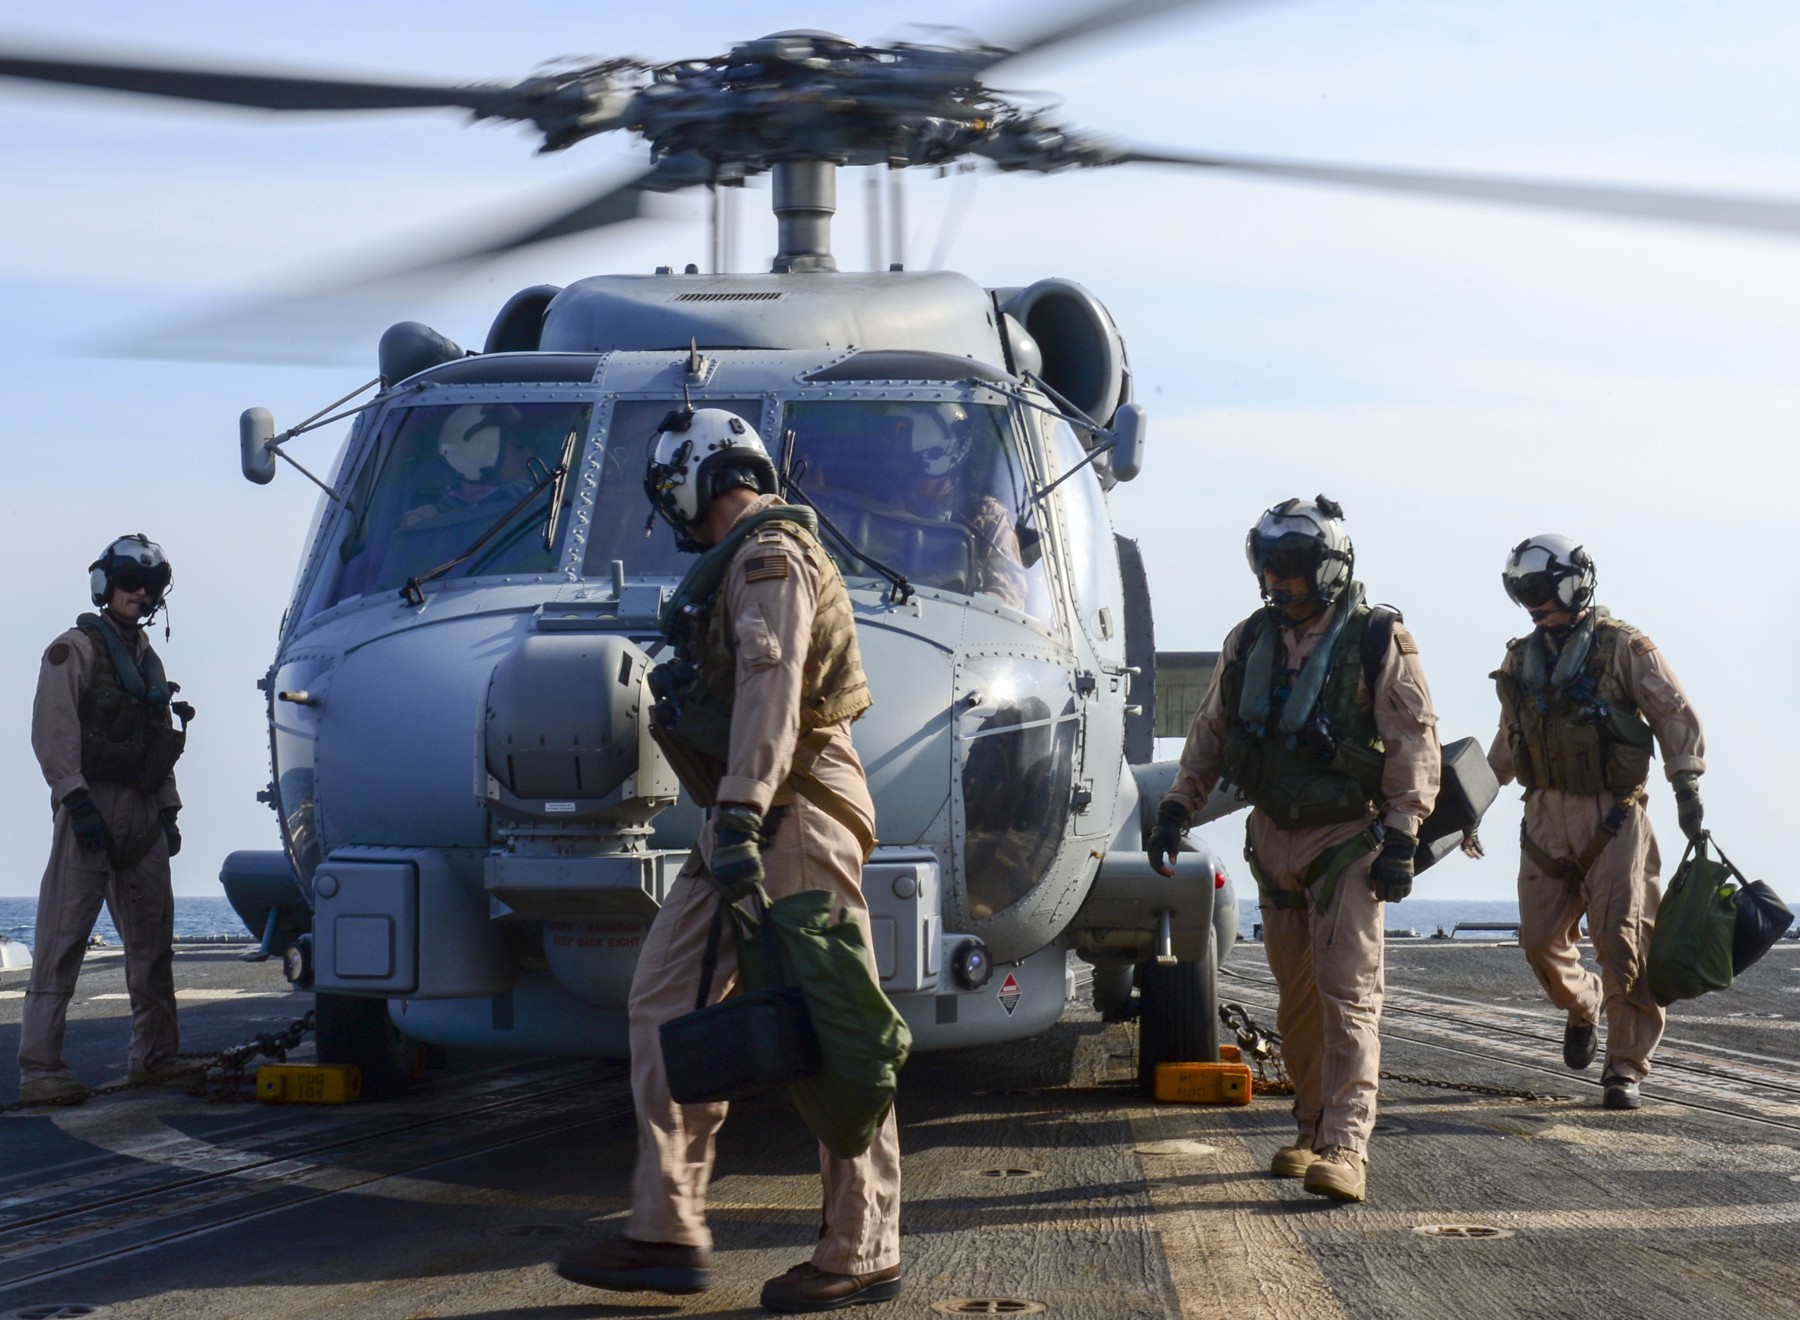 hsm-73 battlecats helicopter maritime strike squadron us navy mh-60r seahawk 2014 61